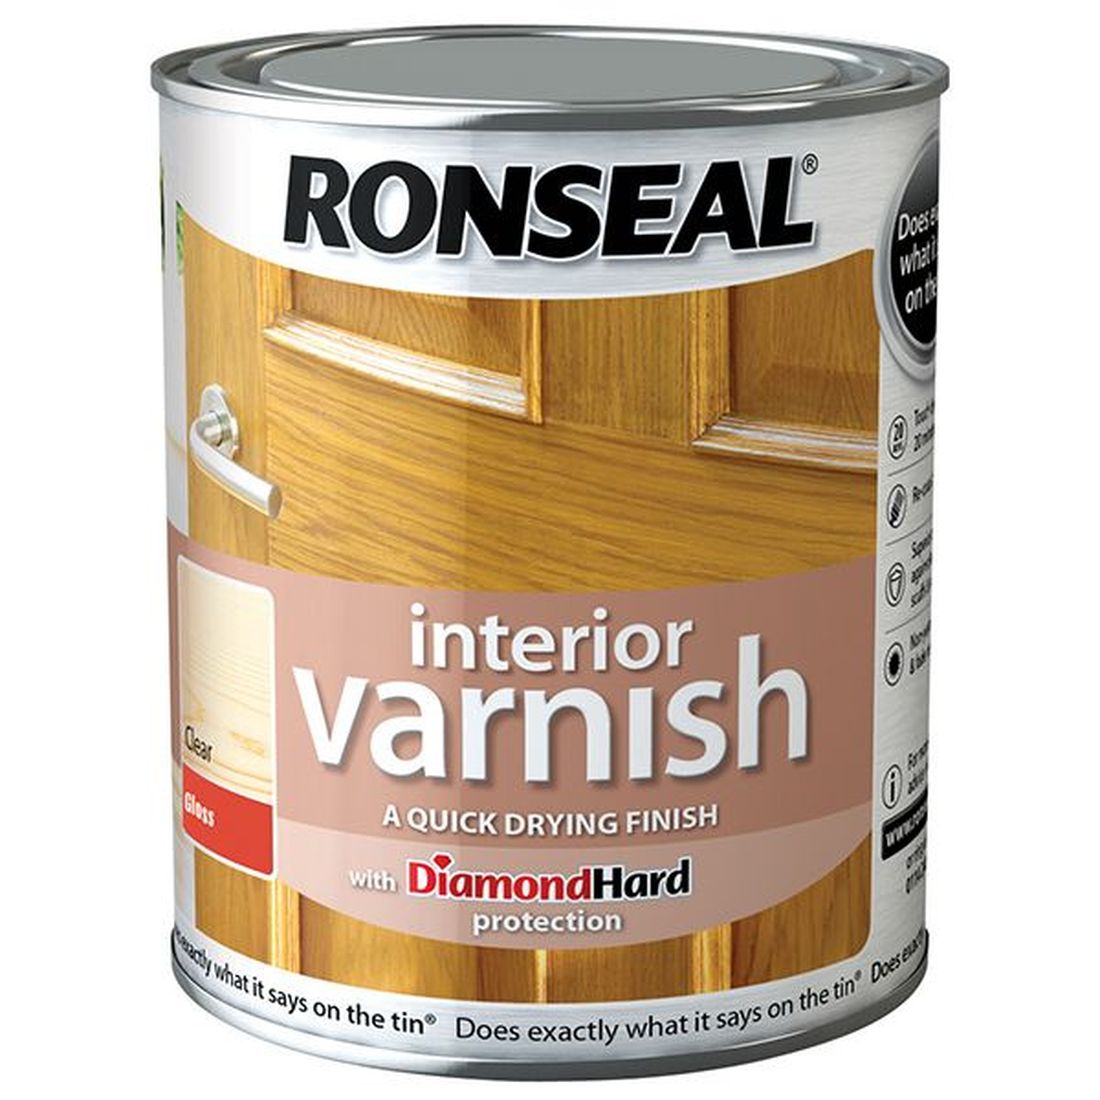 Ronseal Interior Varnish Quick Dry Gloss Clear 2.5 litre                                